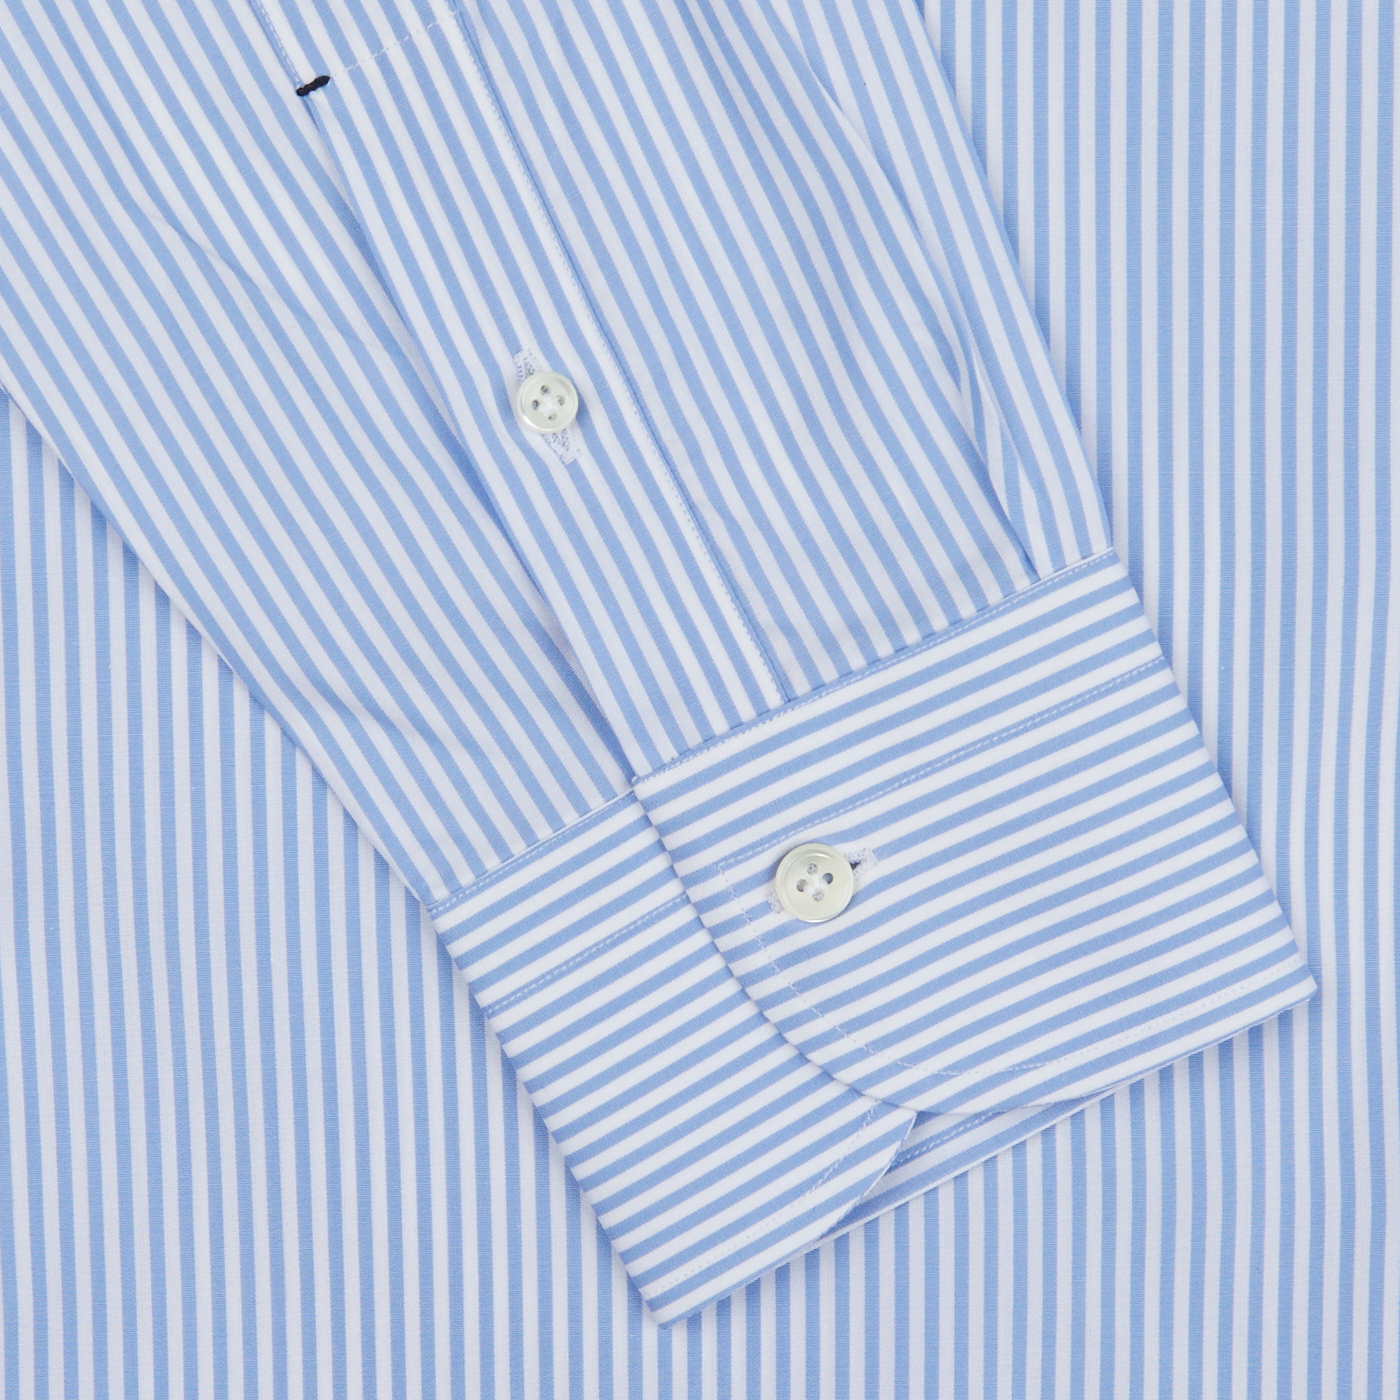 Close-up of a Mazzarelli Light Blue White Striped Cotton BD Slim Shirt showing detail of the cuff with buttons.